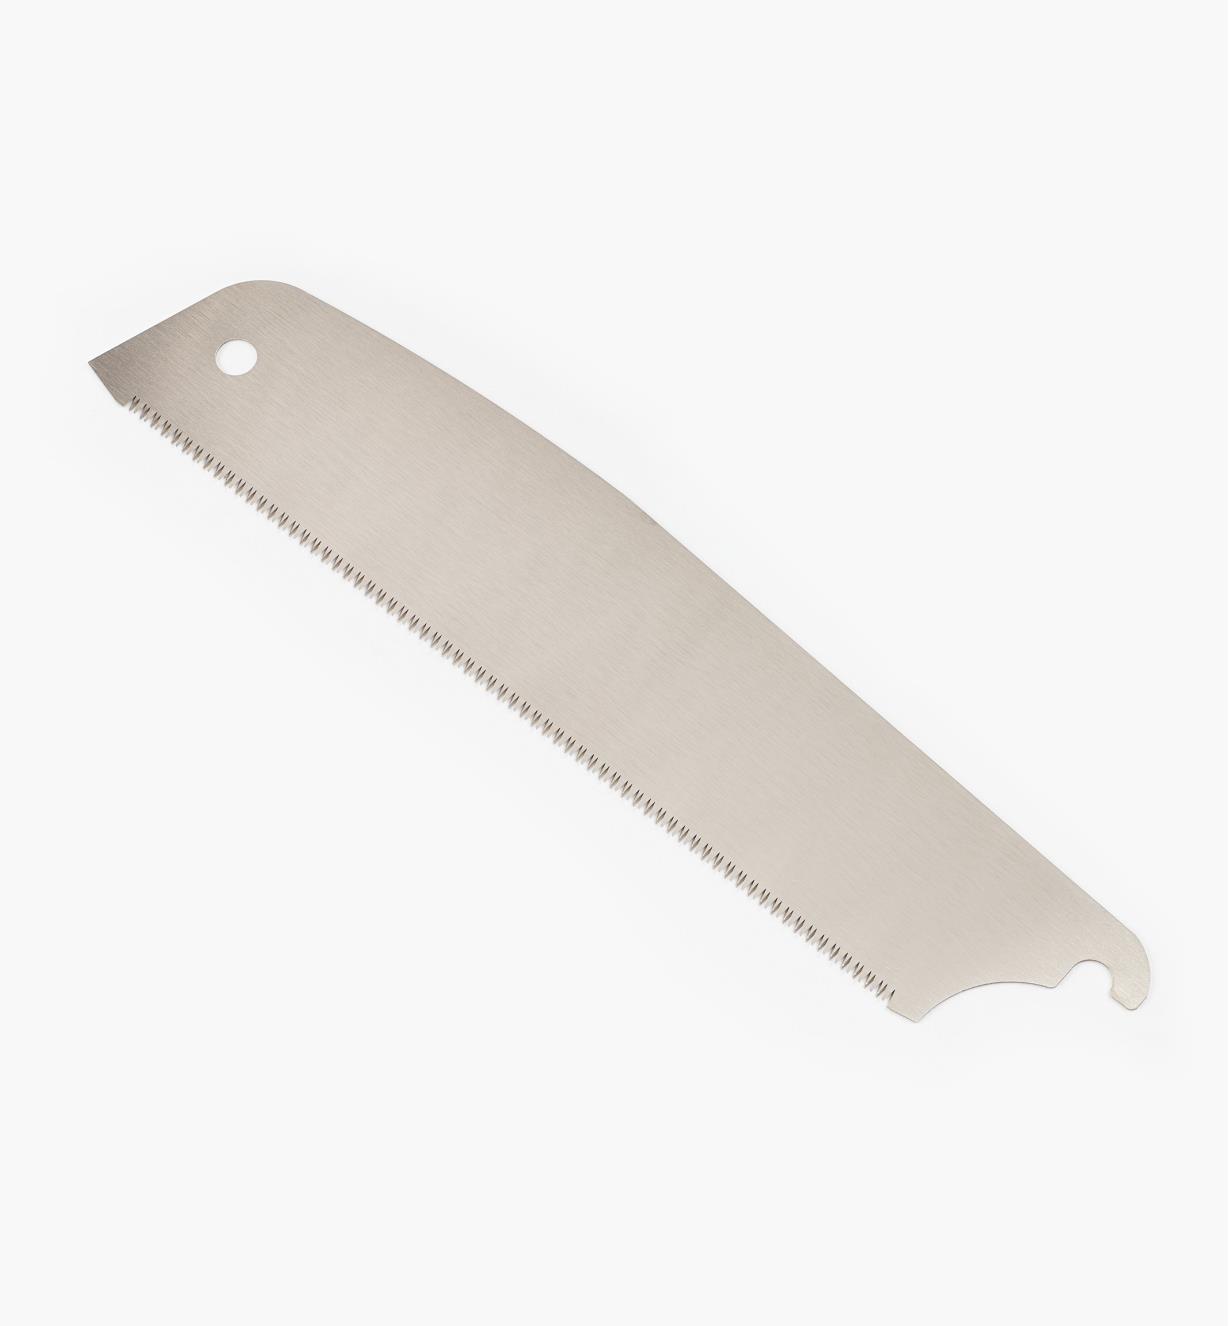 60T5702 - Repl. Blade for HSS Japanese Saw